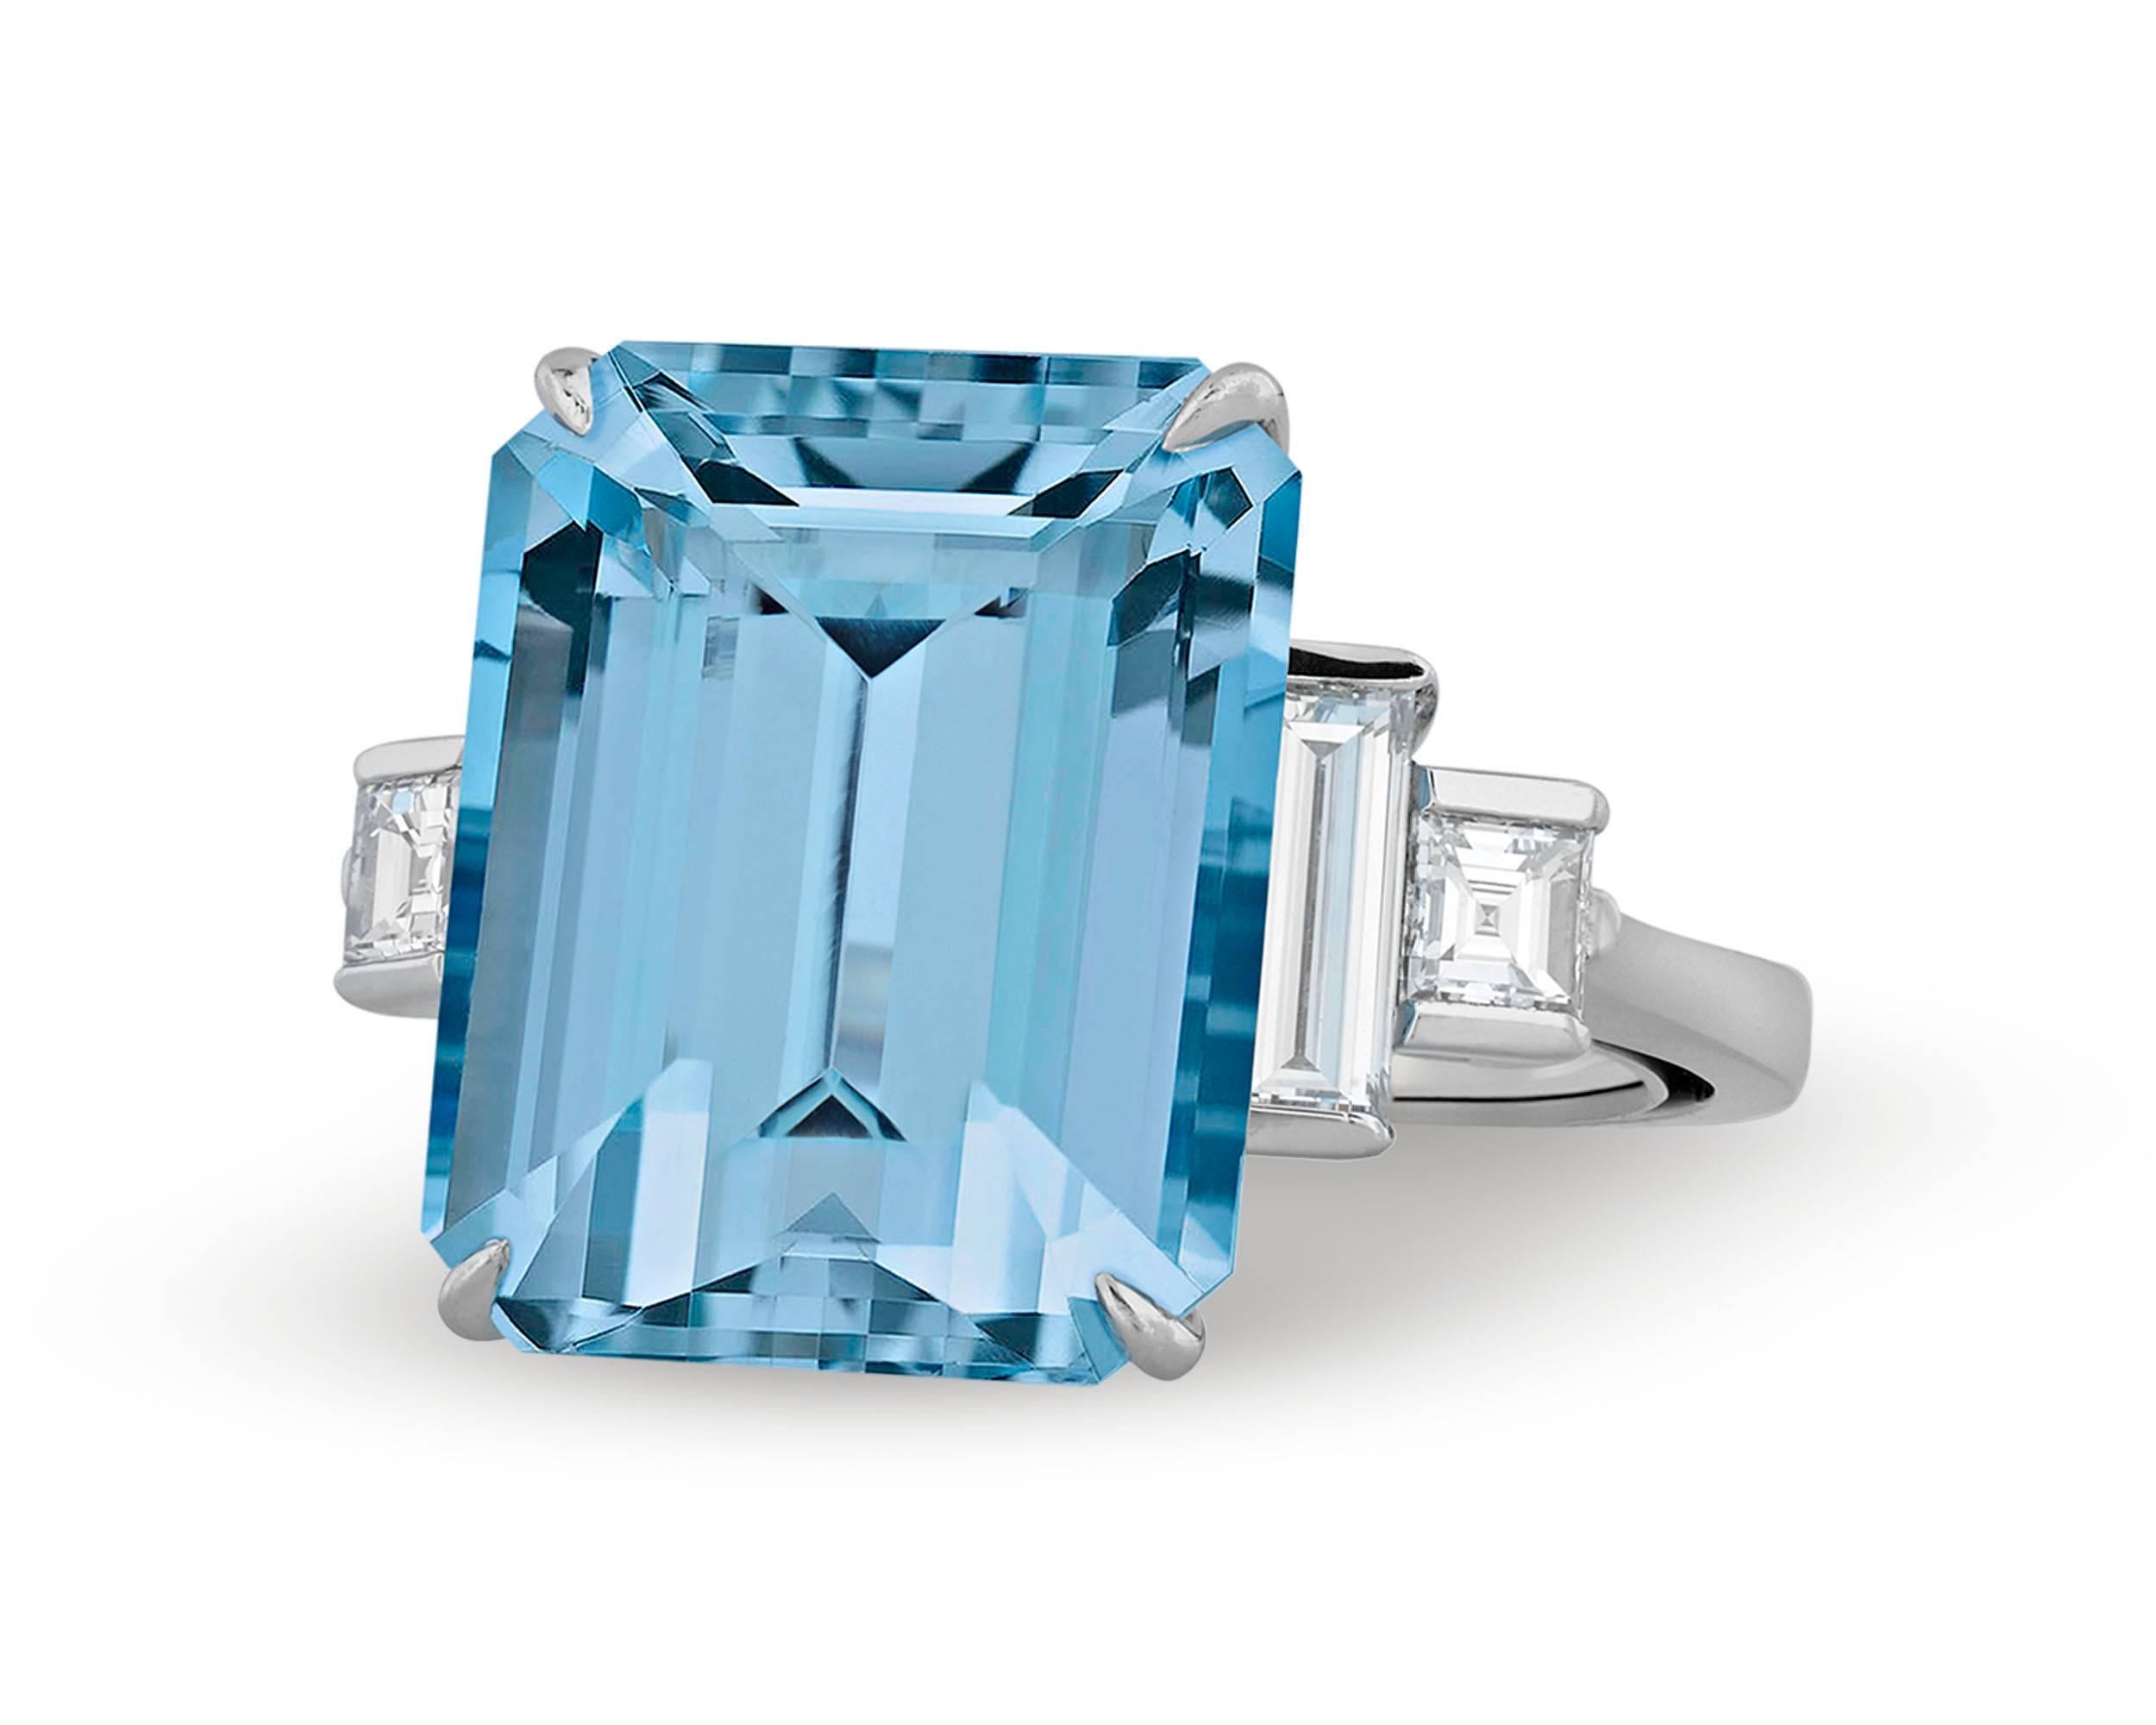 An exceptional emerald-cut aquamarine weighing approximately 15.00 carats is the star of this outstanding ring by Tiffany & Co. Sparkling with a pure ocean-blue hue, the gem is beautifully on display in a platinum setting studded with brilliant